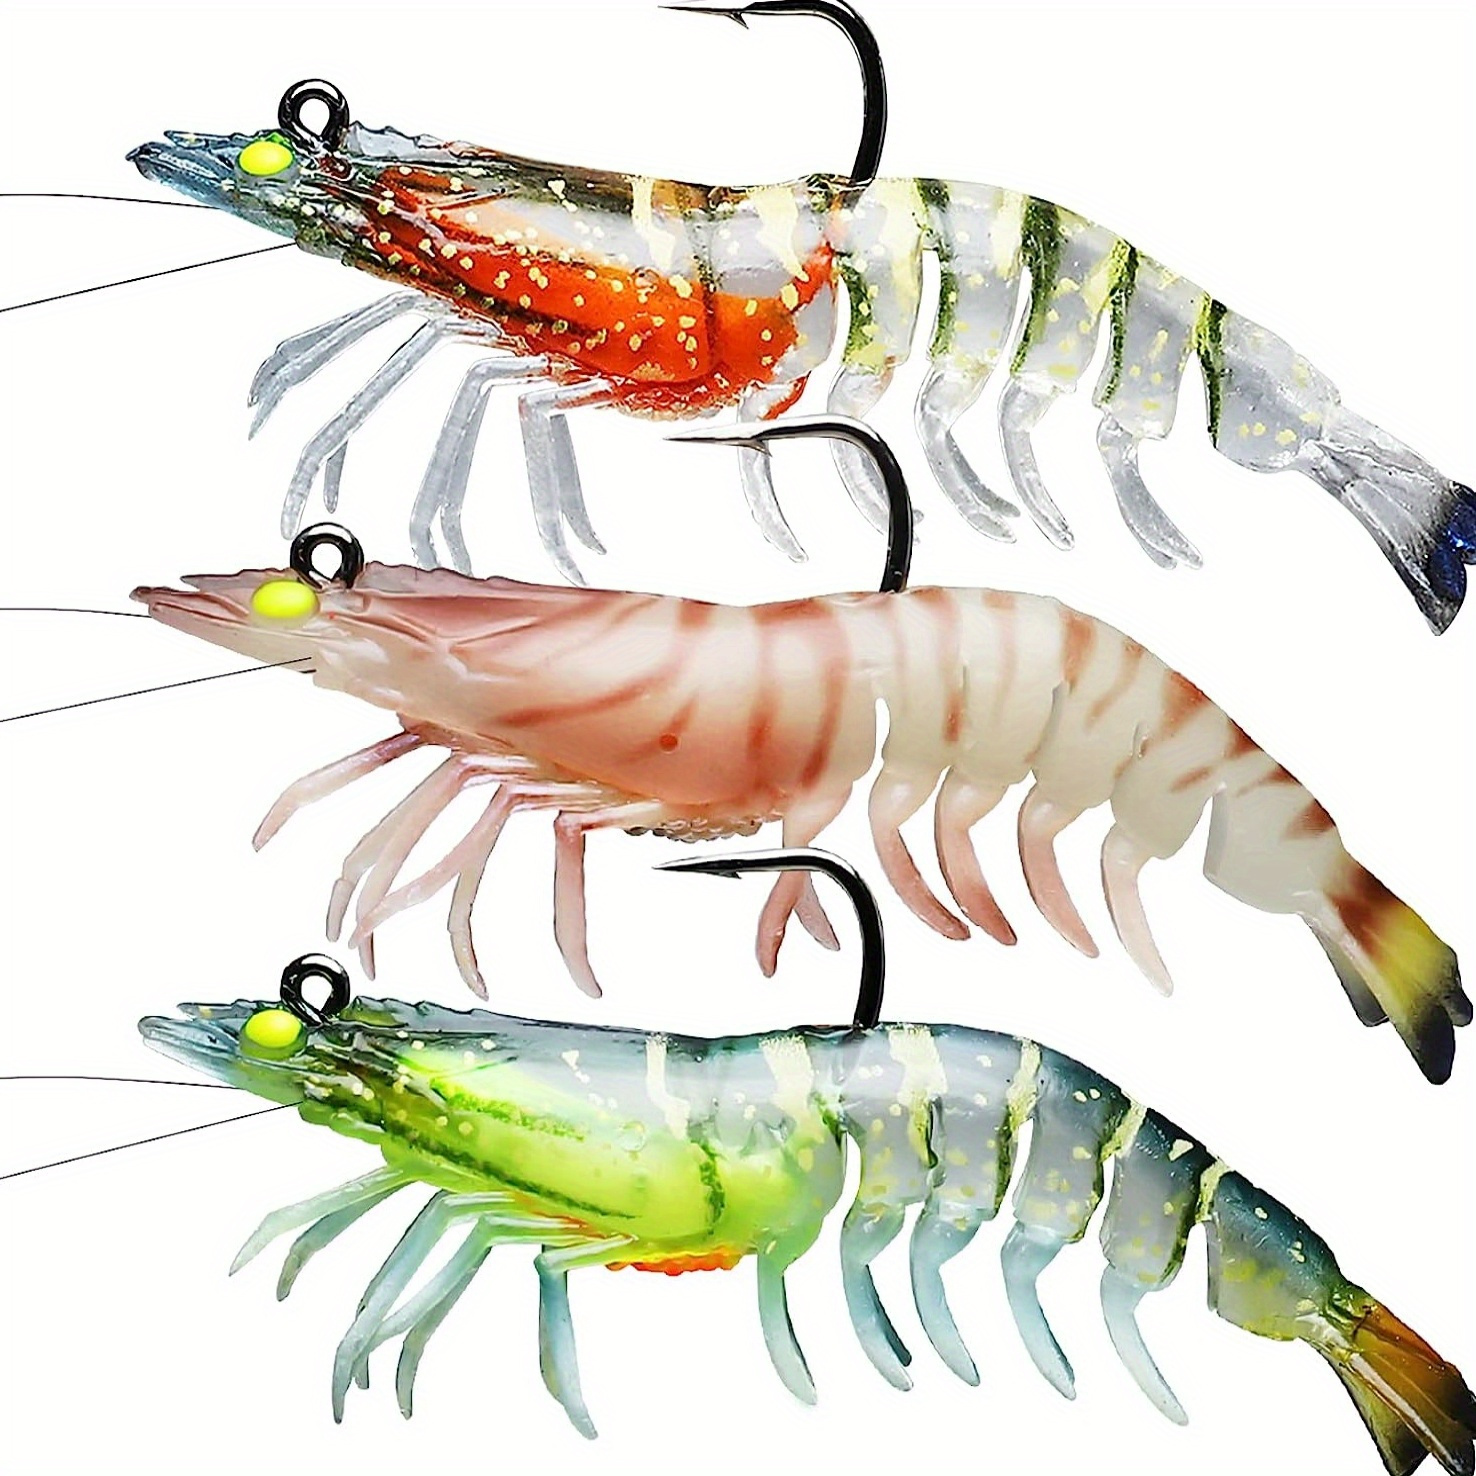 

Pre-assembled Fishing Jig, 1:50 Super Durable Tpe Fishing Lure, Well-made Lifelike Shrimp Crayfish Bait, -free Bait For Weever Big-eyed Fish, Saltwater Fishing Gear, Separately Stored!